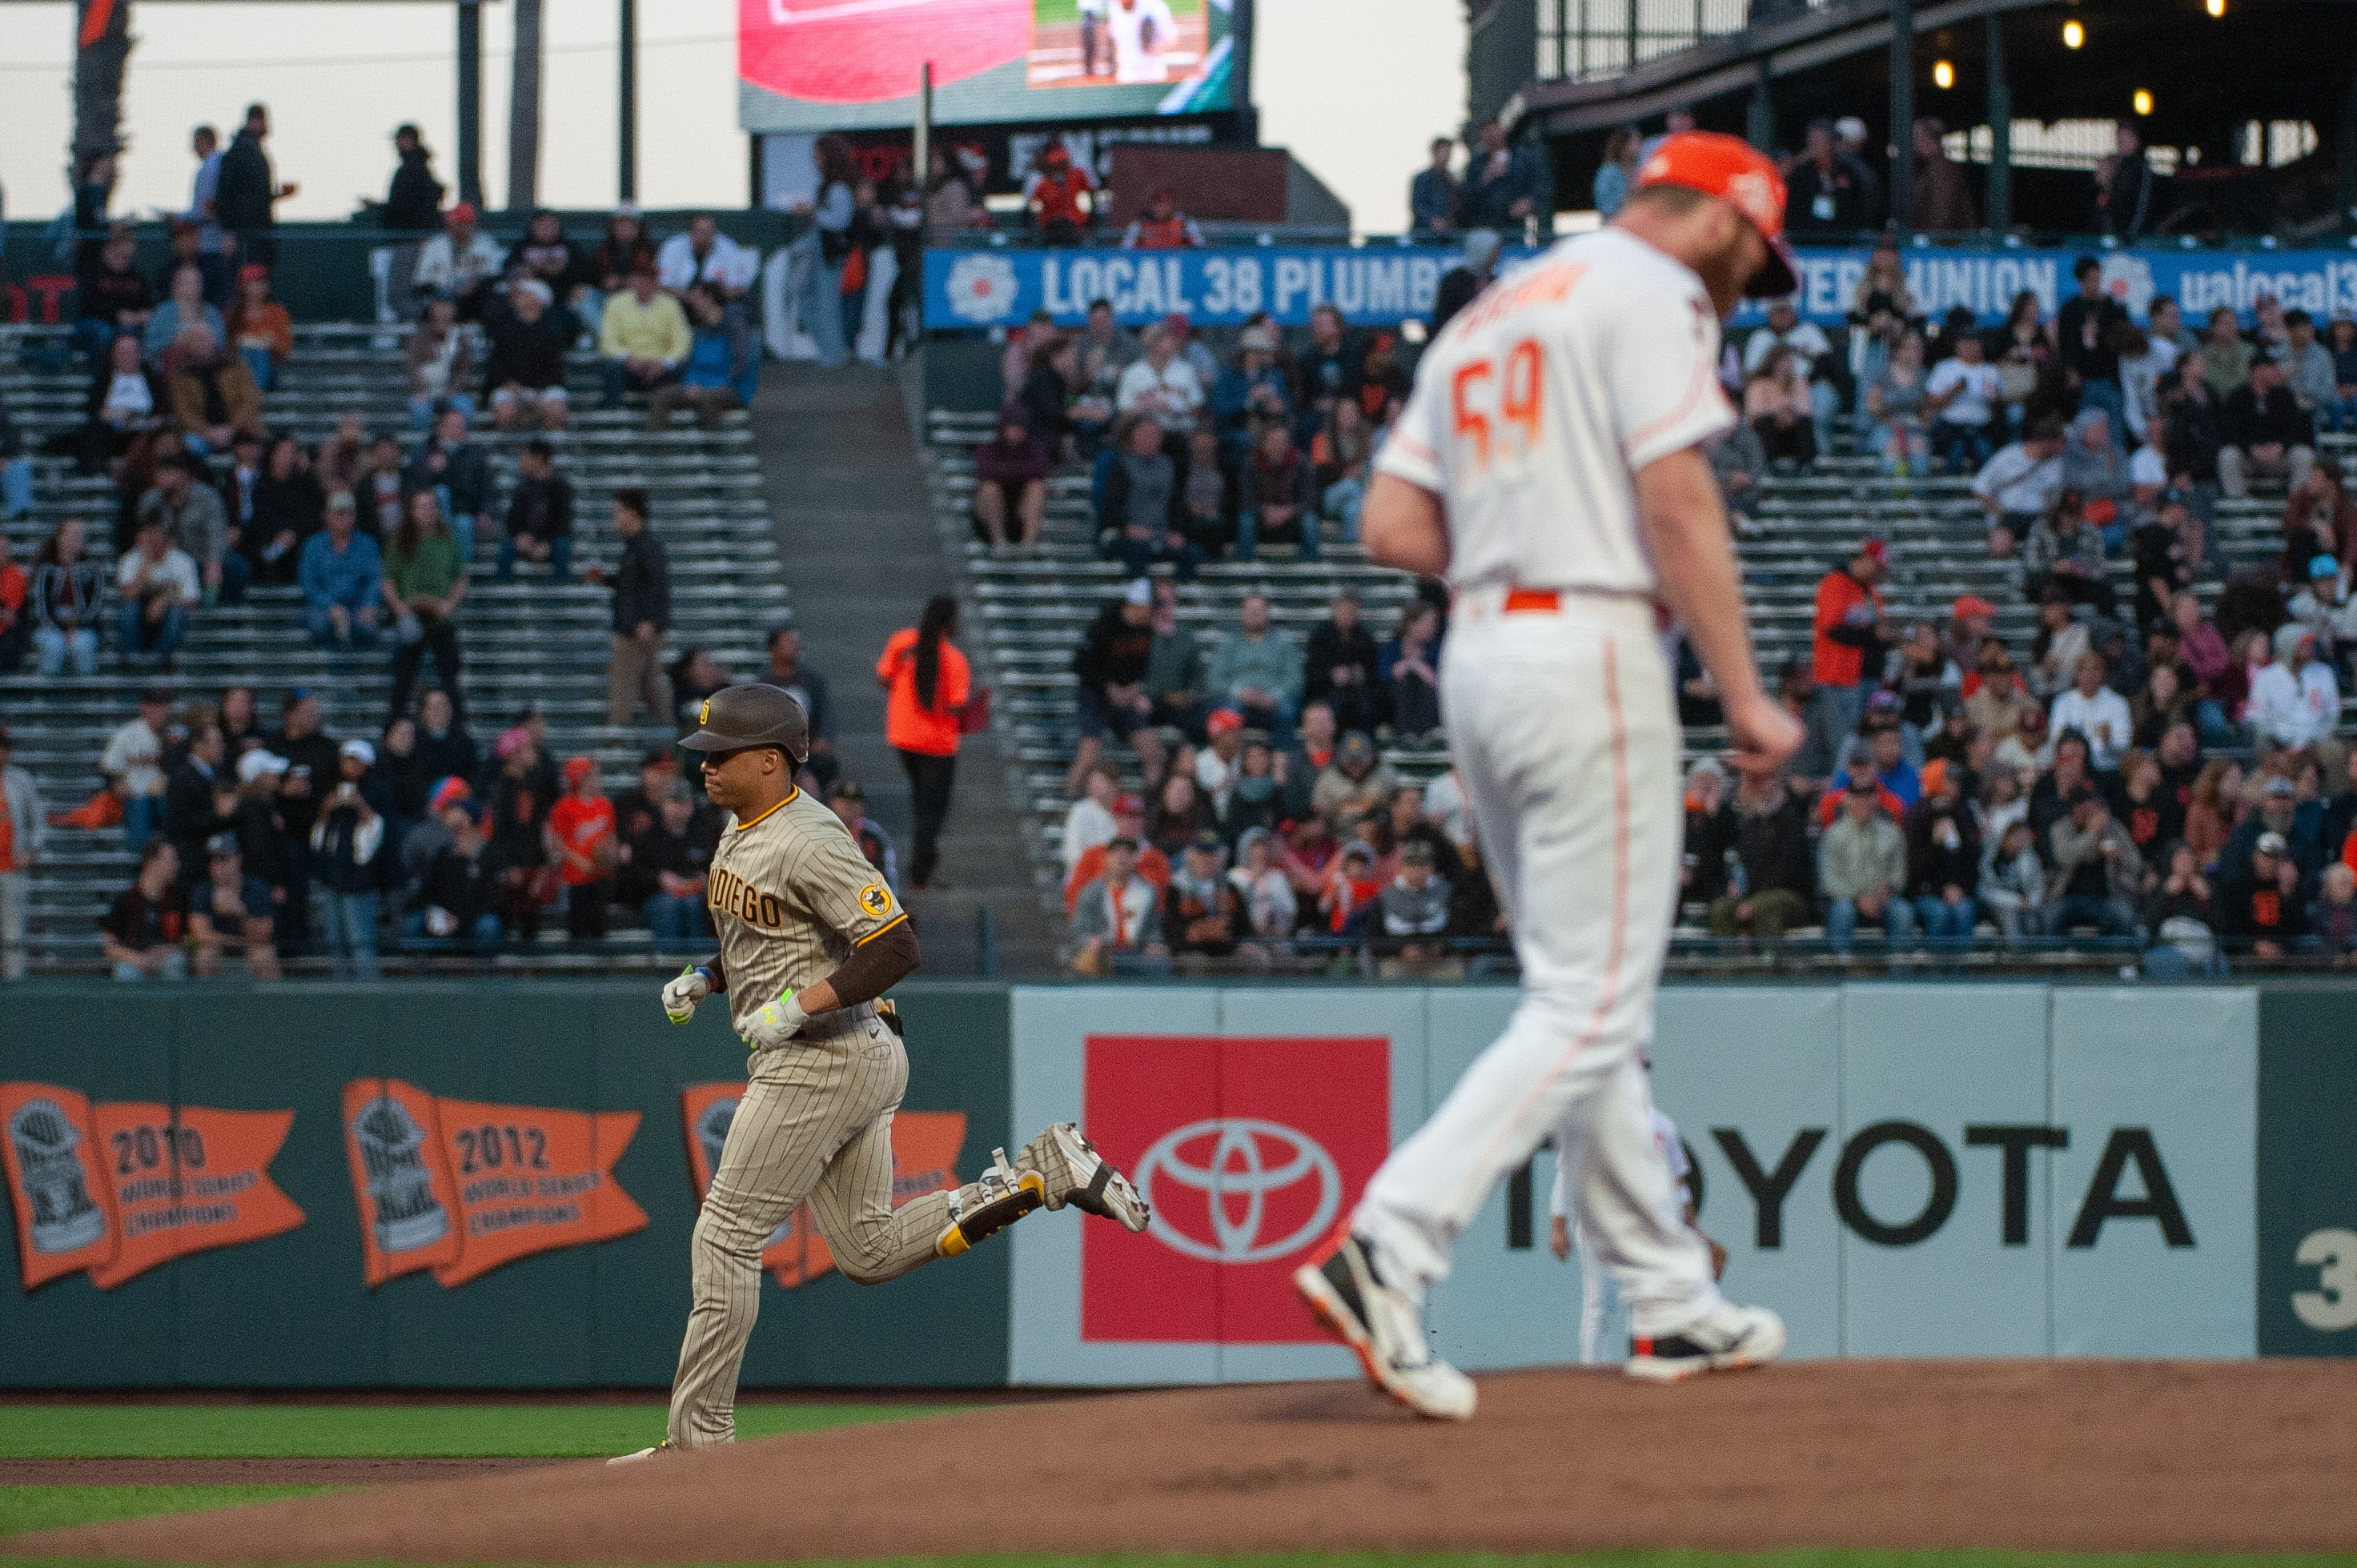 Giants beat Nationals, 3-2, to return to NL Championship Series